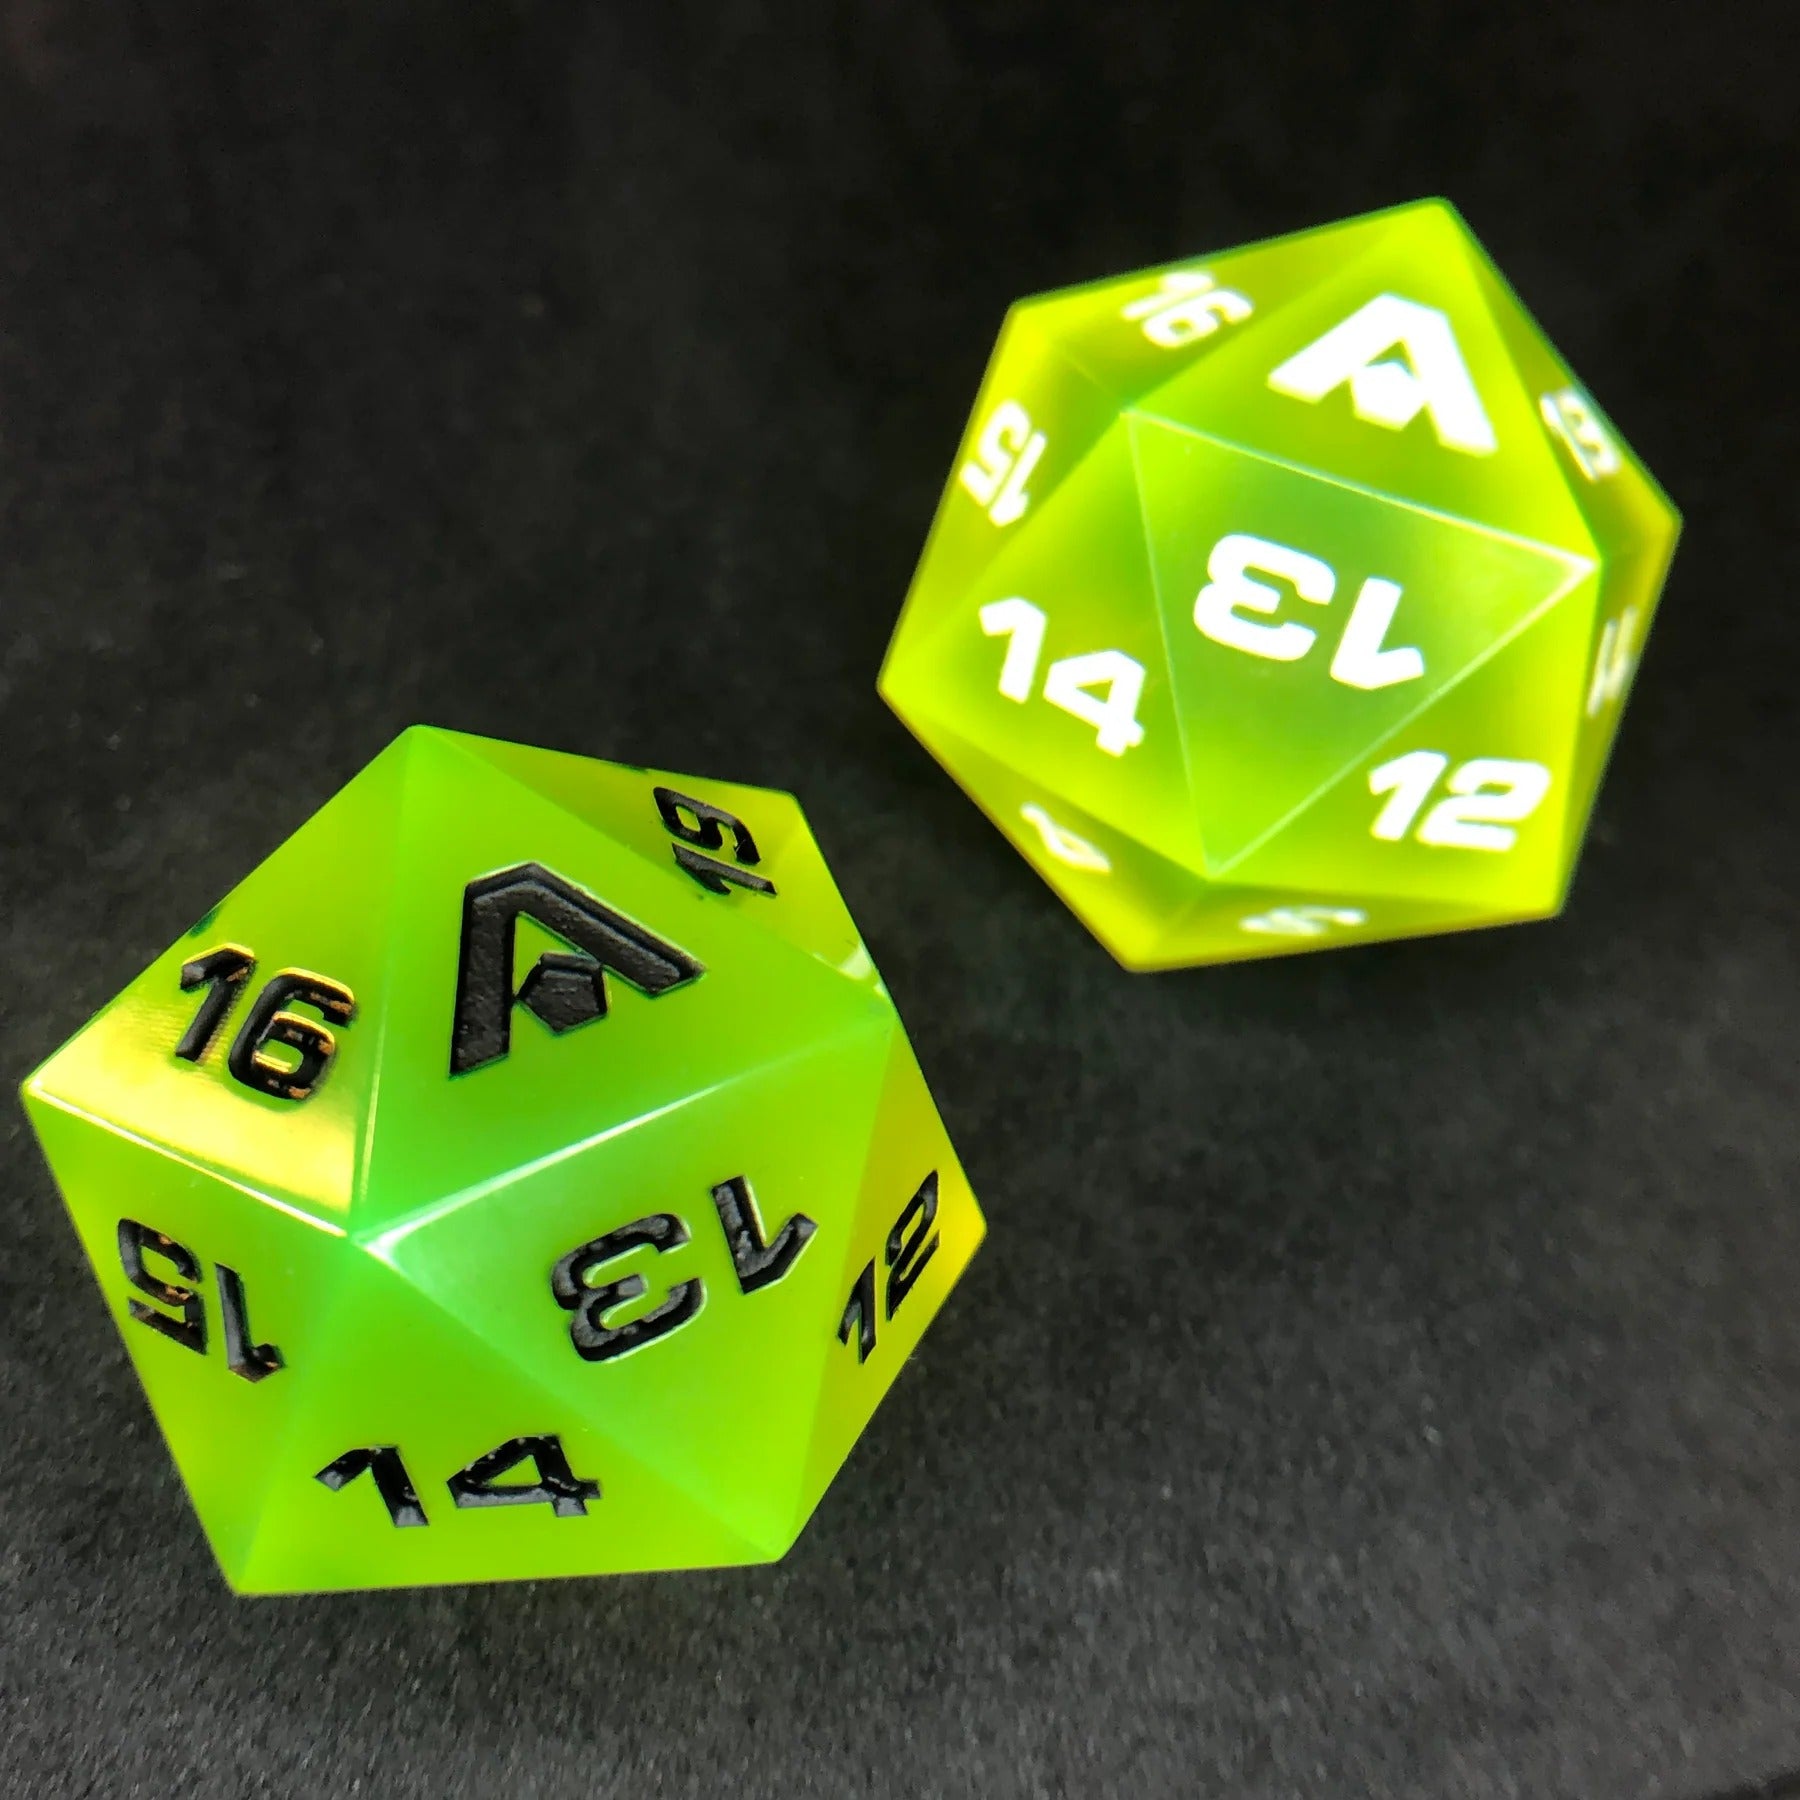 How We Roll: The Difference Between Standard and Spindown D20 Dice